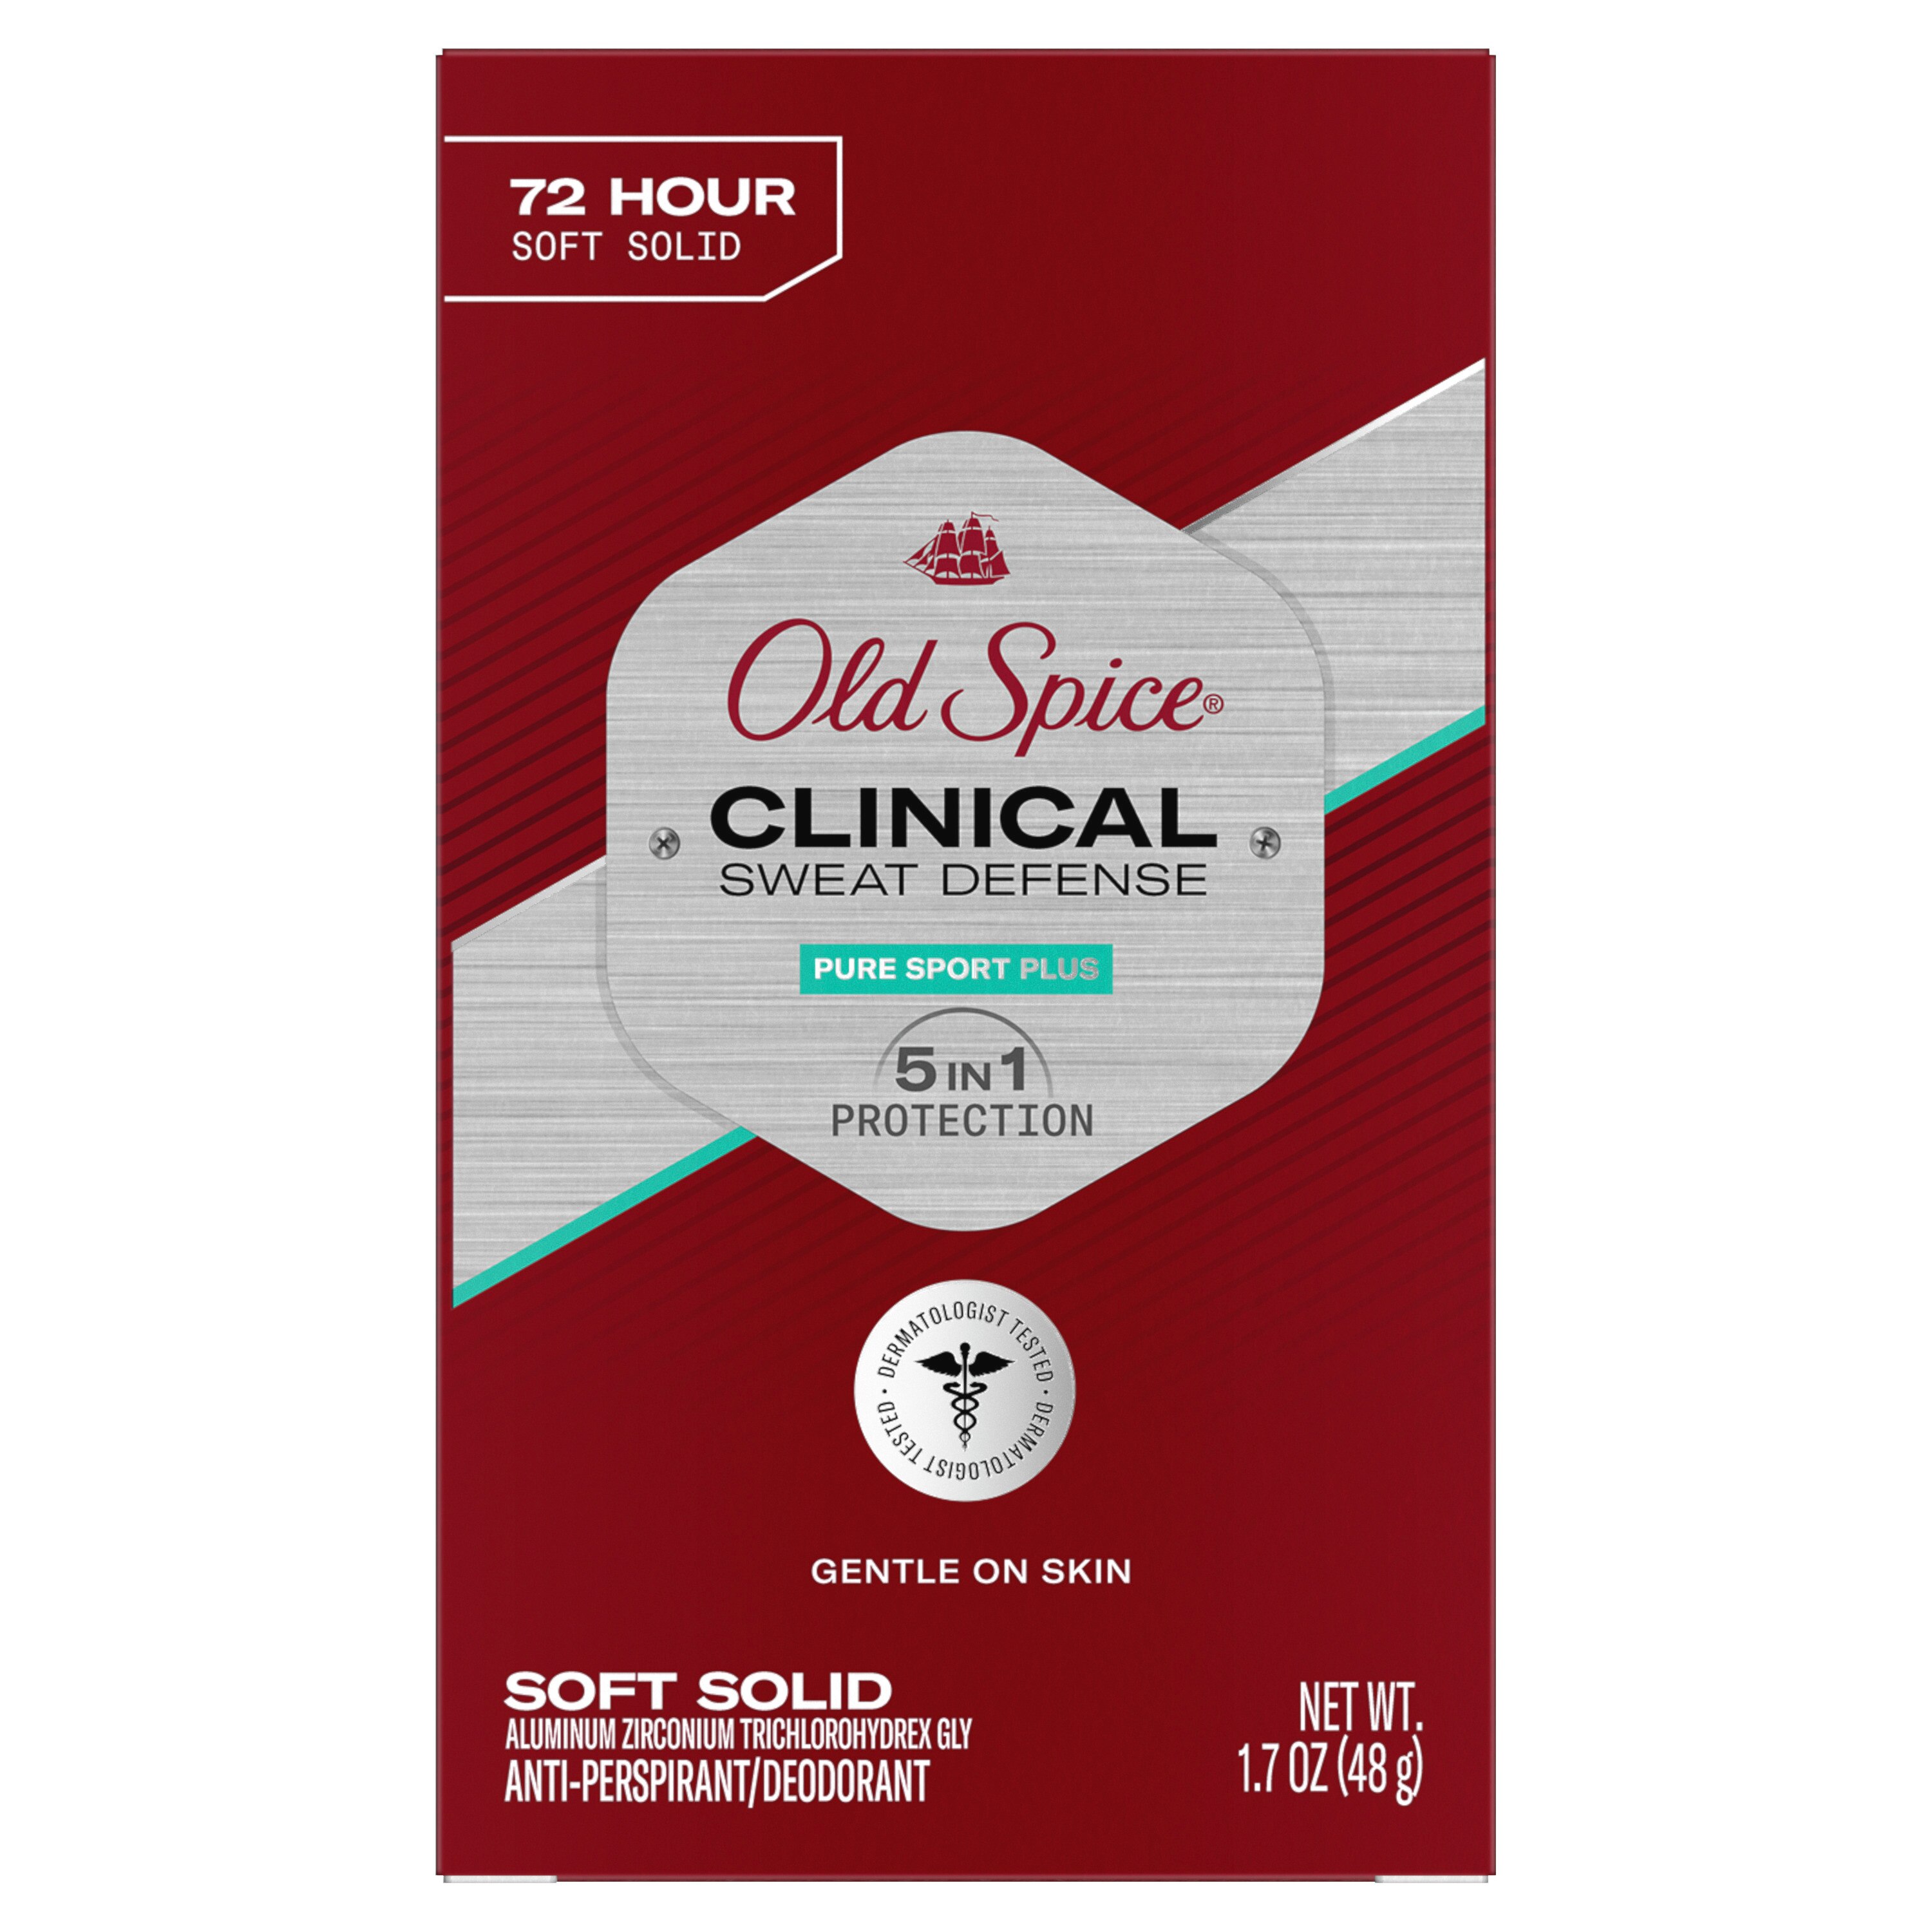 Old Spice Clinical Sweat Defense Anti-Perspirant Deodorant for Men, Stronger Swagger, 1.7 OZ